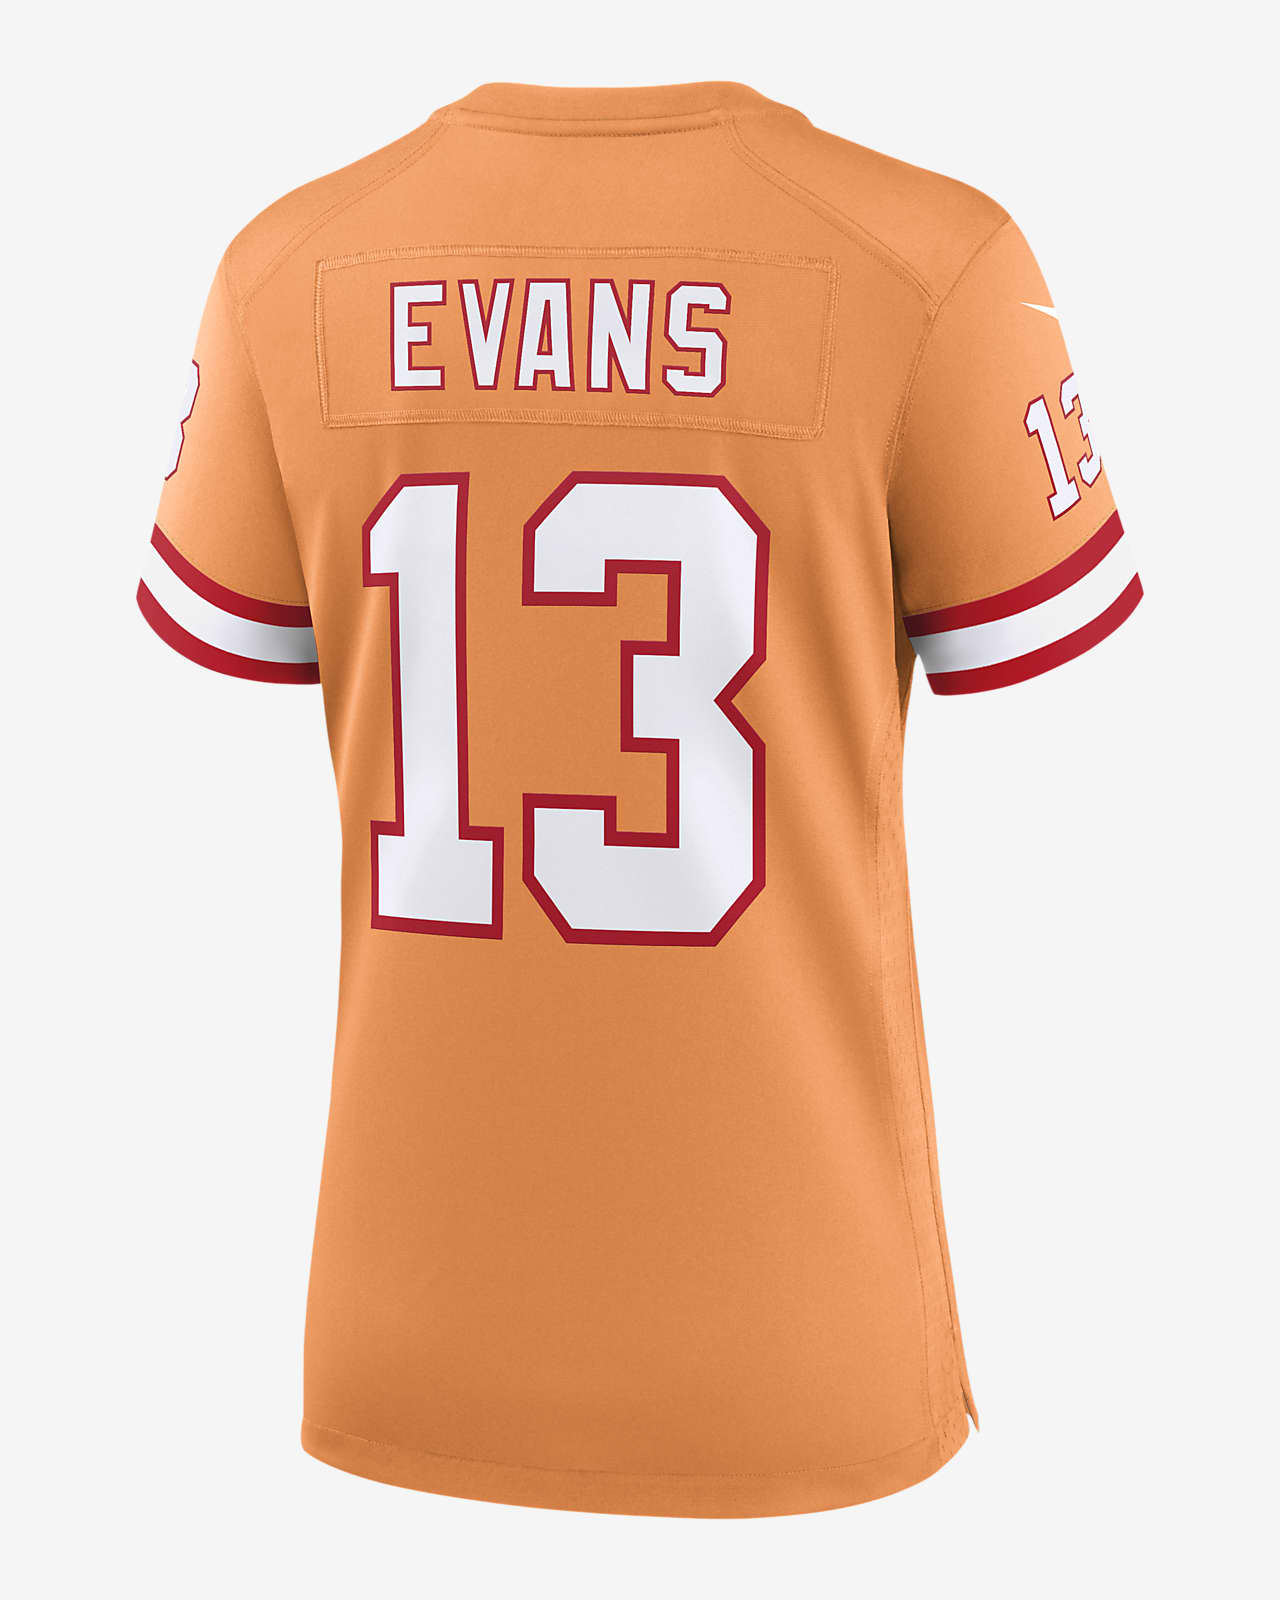 Mike Evans Tampa Bay Buccaneers Nike Women's NFL Game Football Jersey in Orange, Size: Small | 67NW01OS8BF-PY0